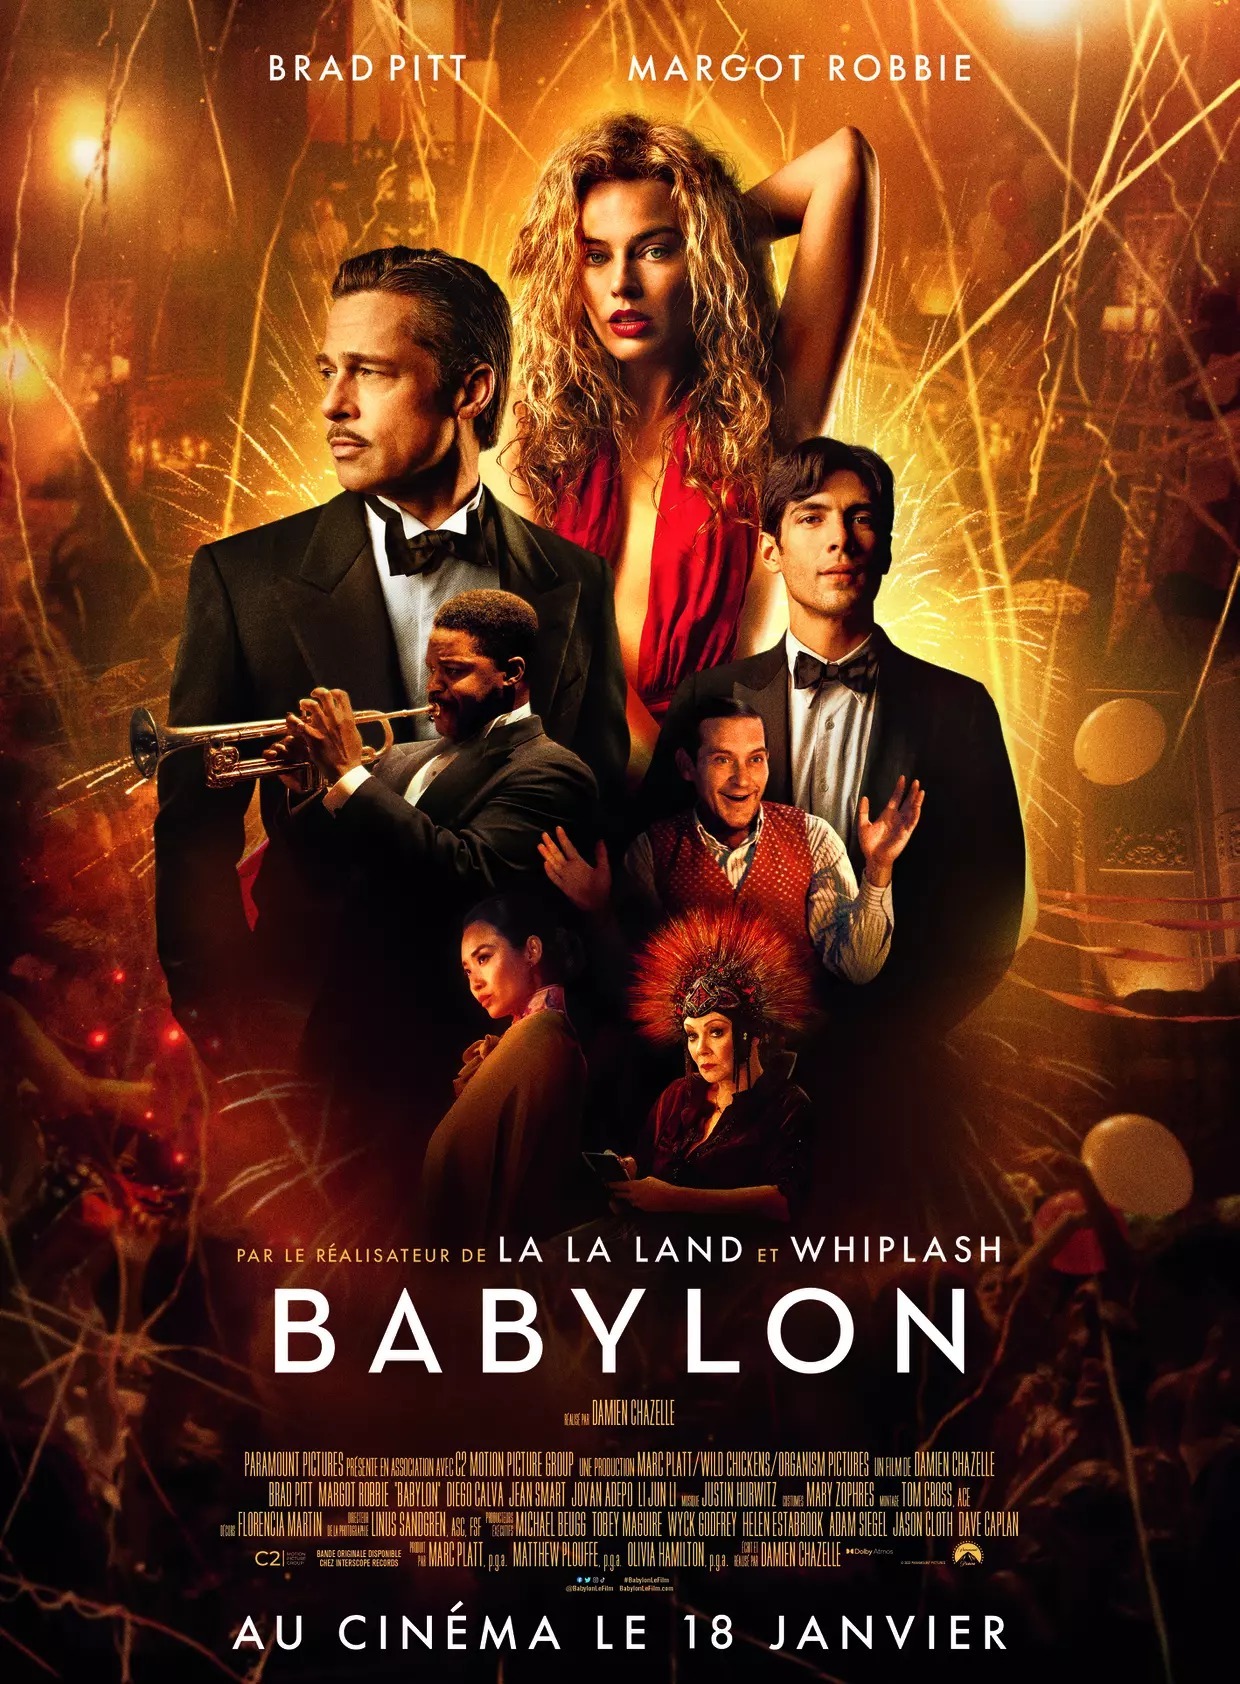 Babylon - Copyright 2022 Paramount Pictures. All Rights Reserved.